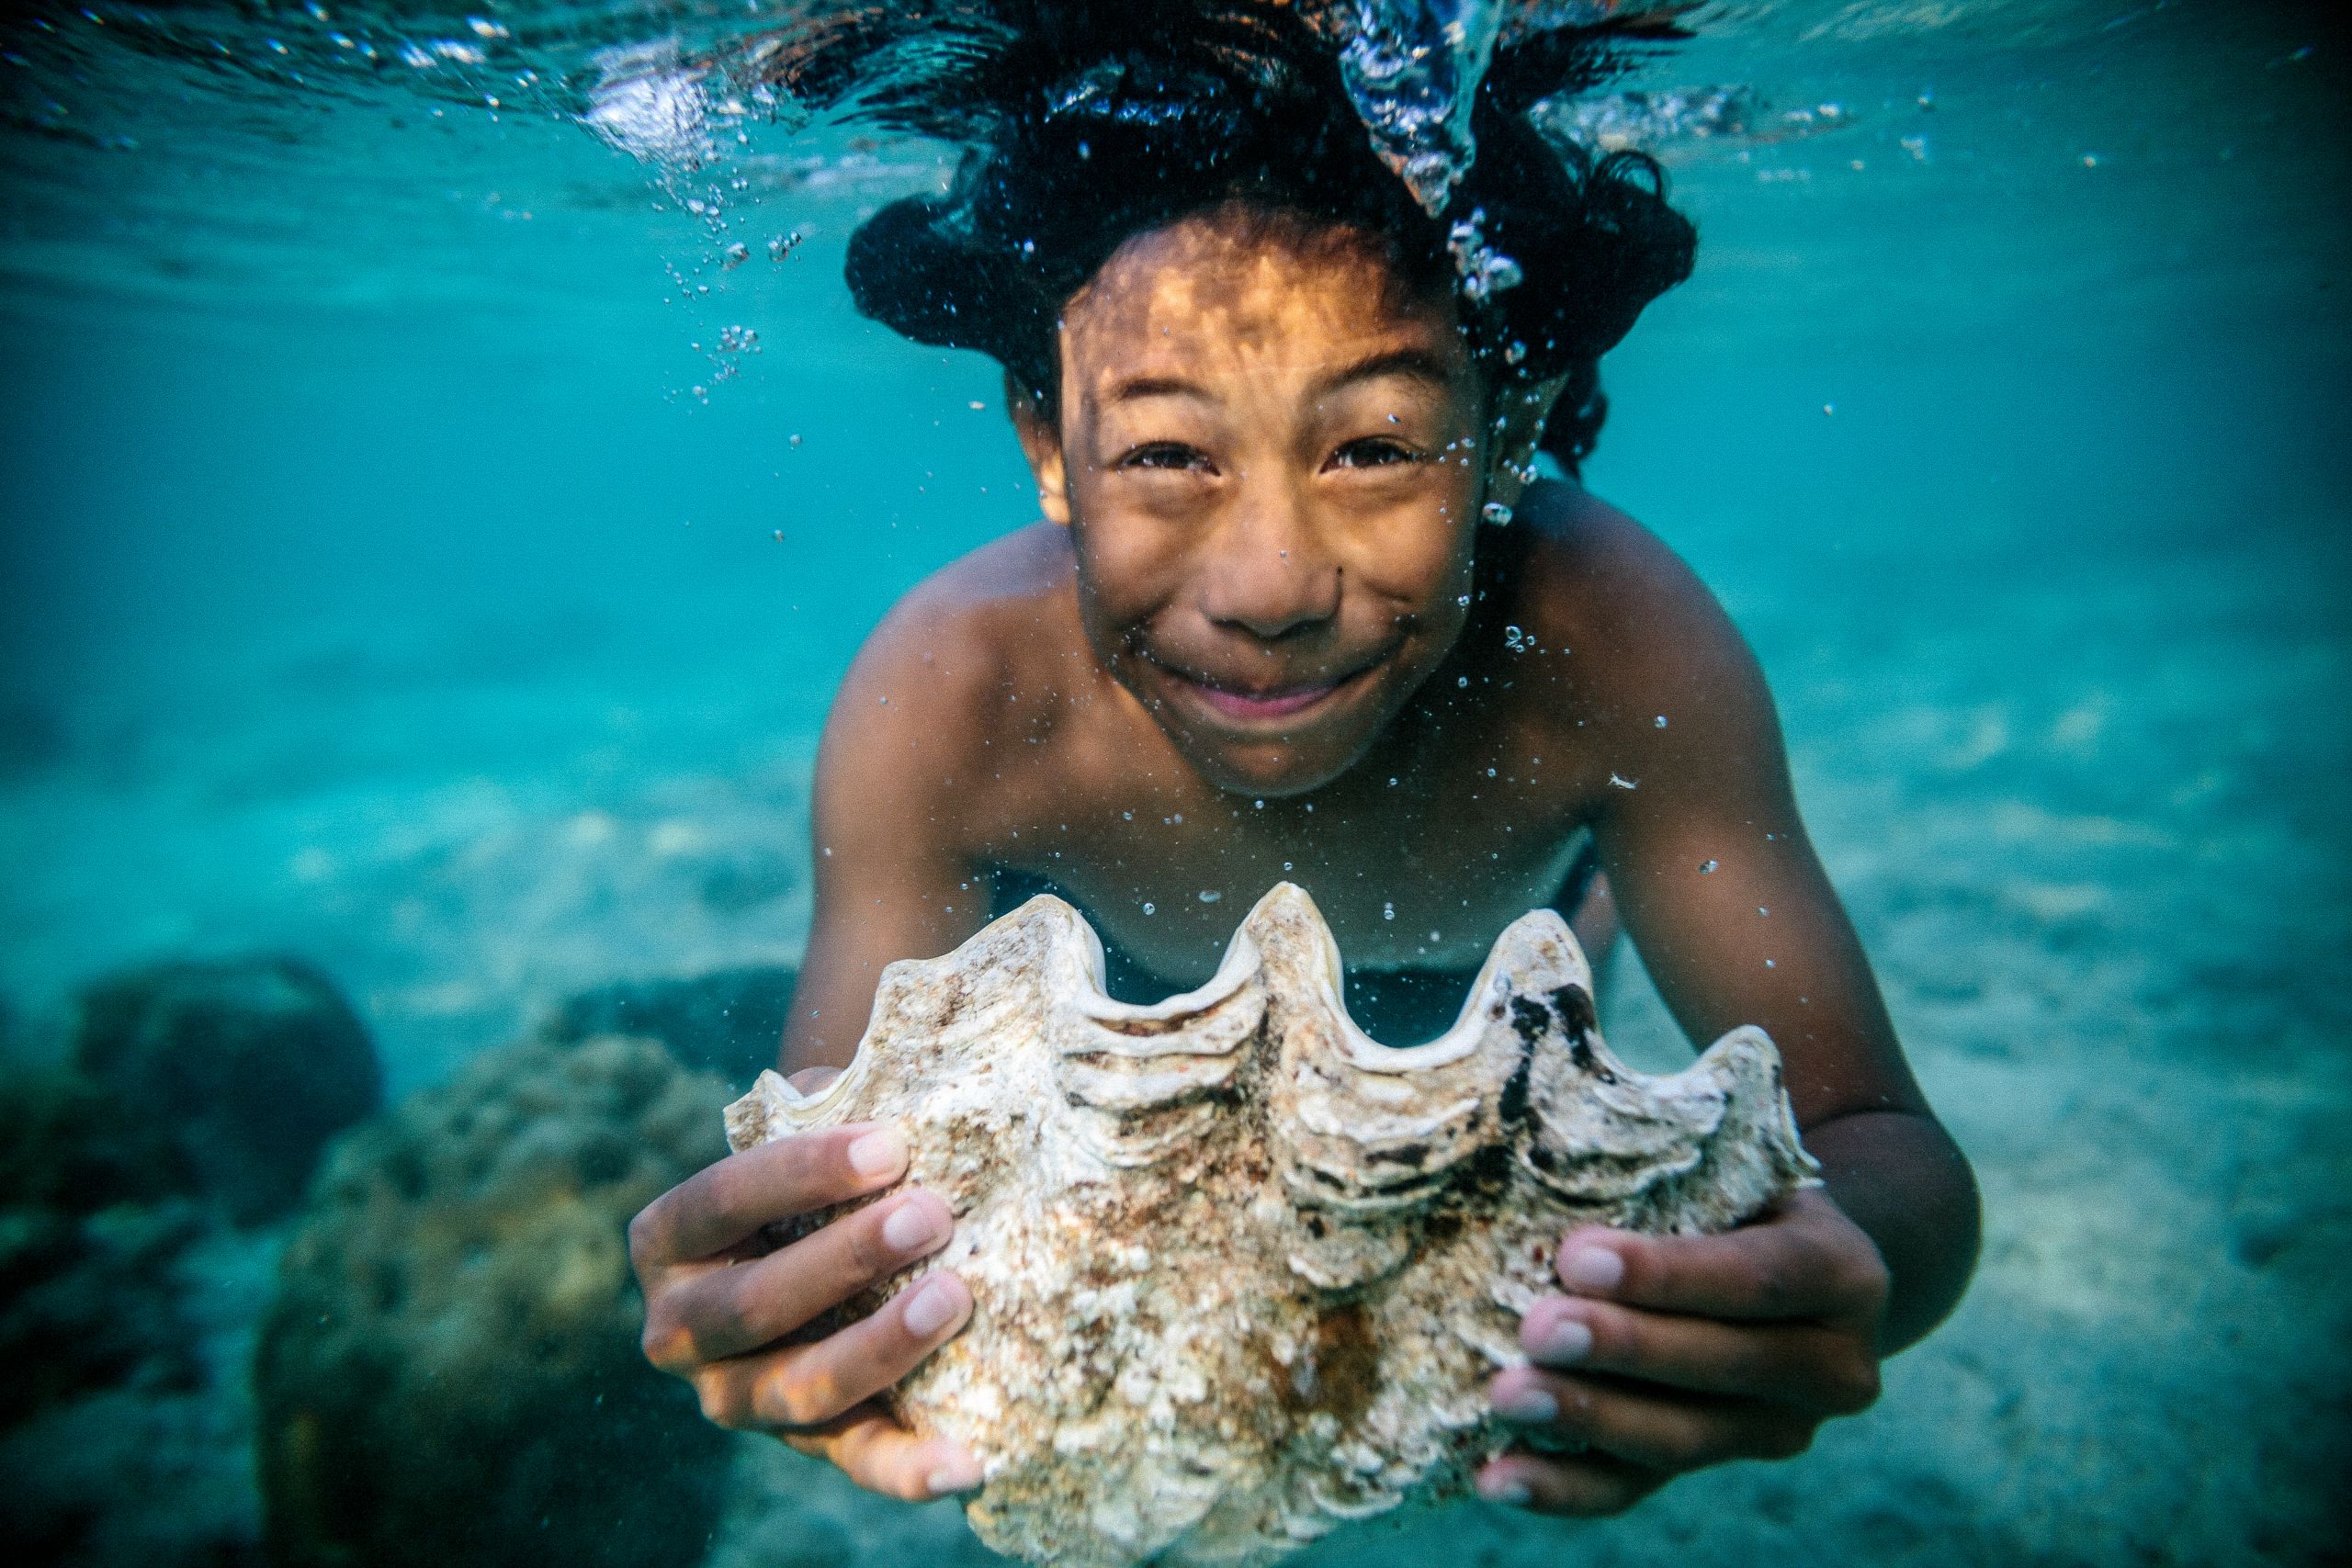 A boy diving for clams